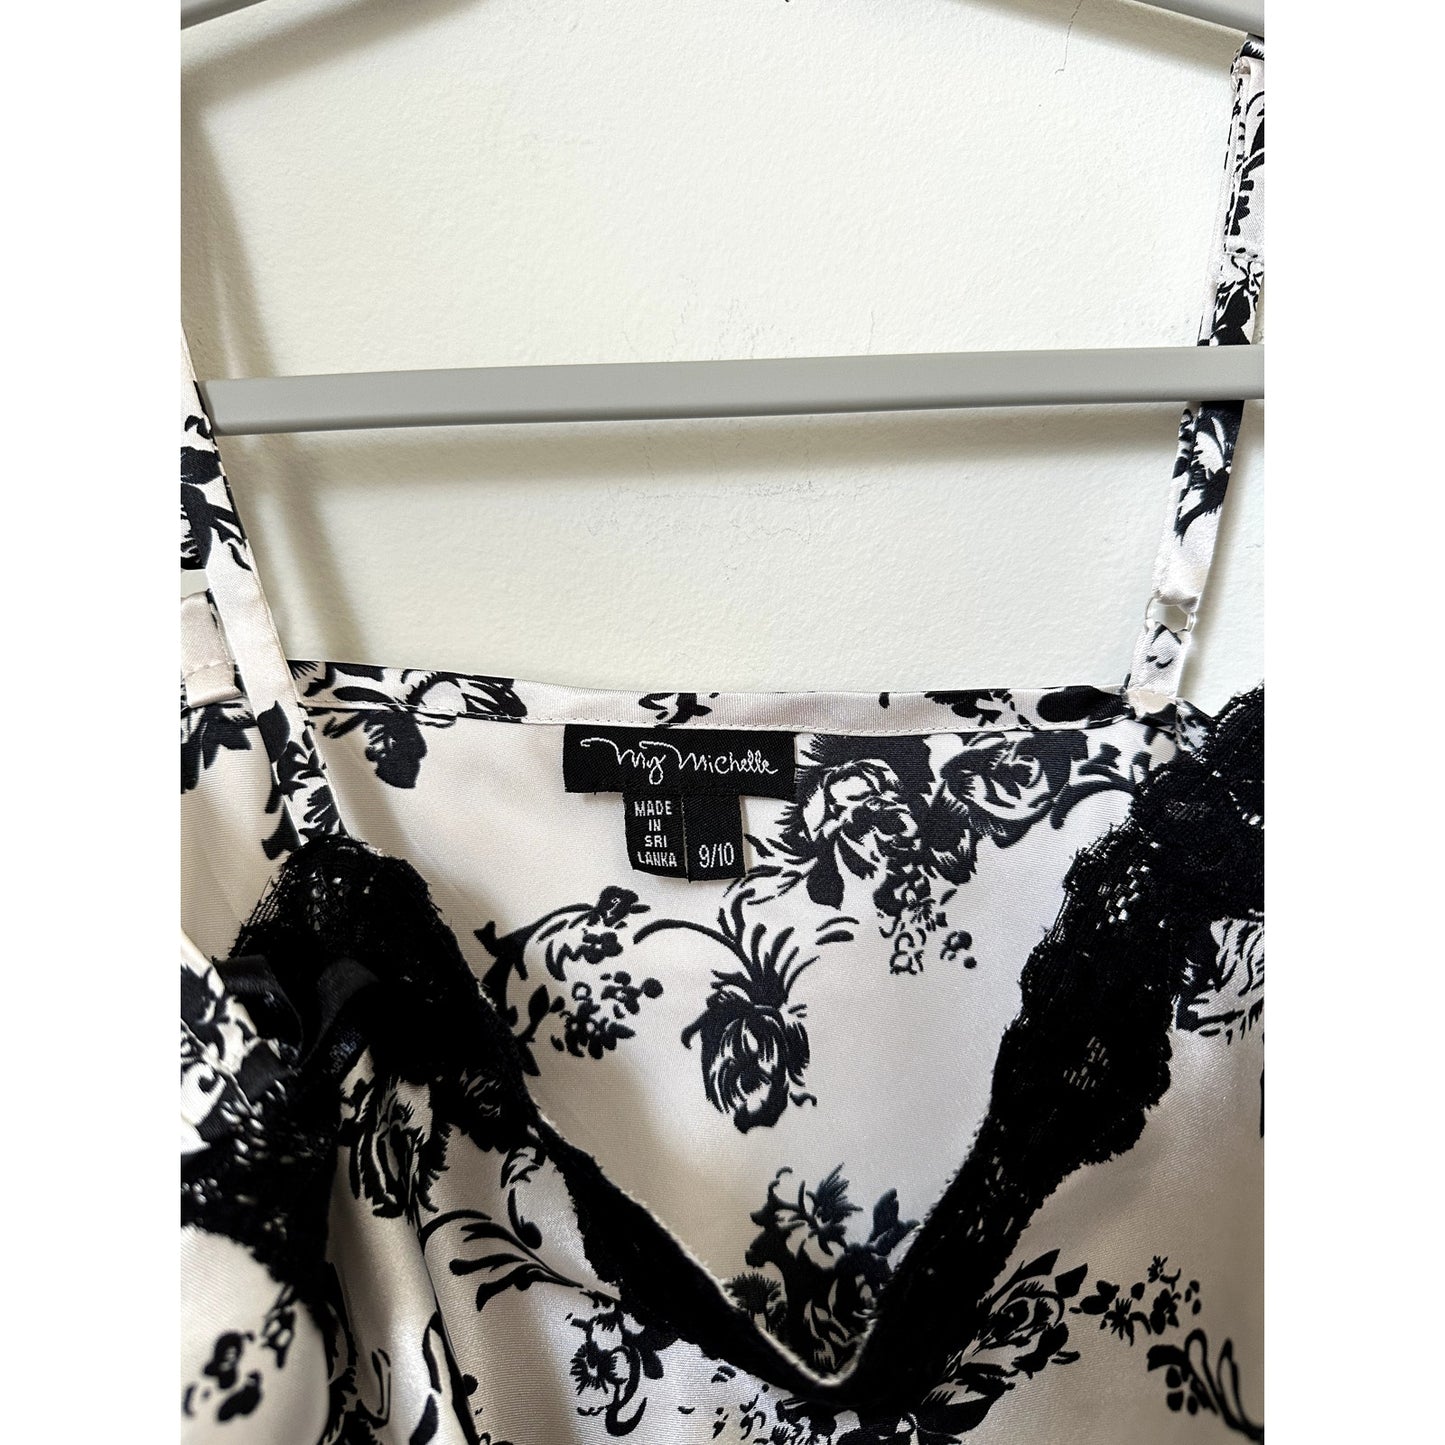 Black and White Floral Satin Cami Tank, Size 9/10